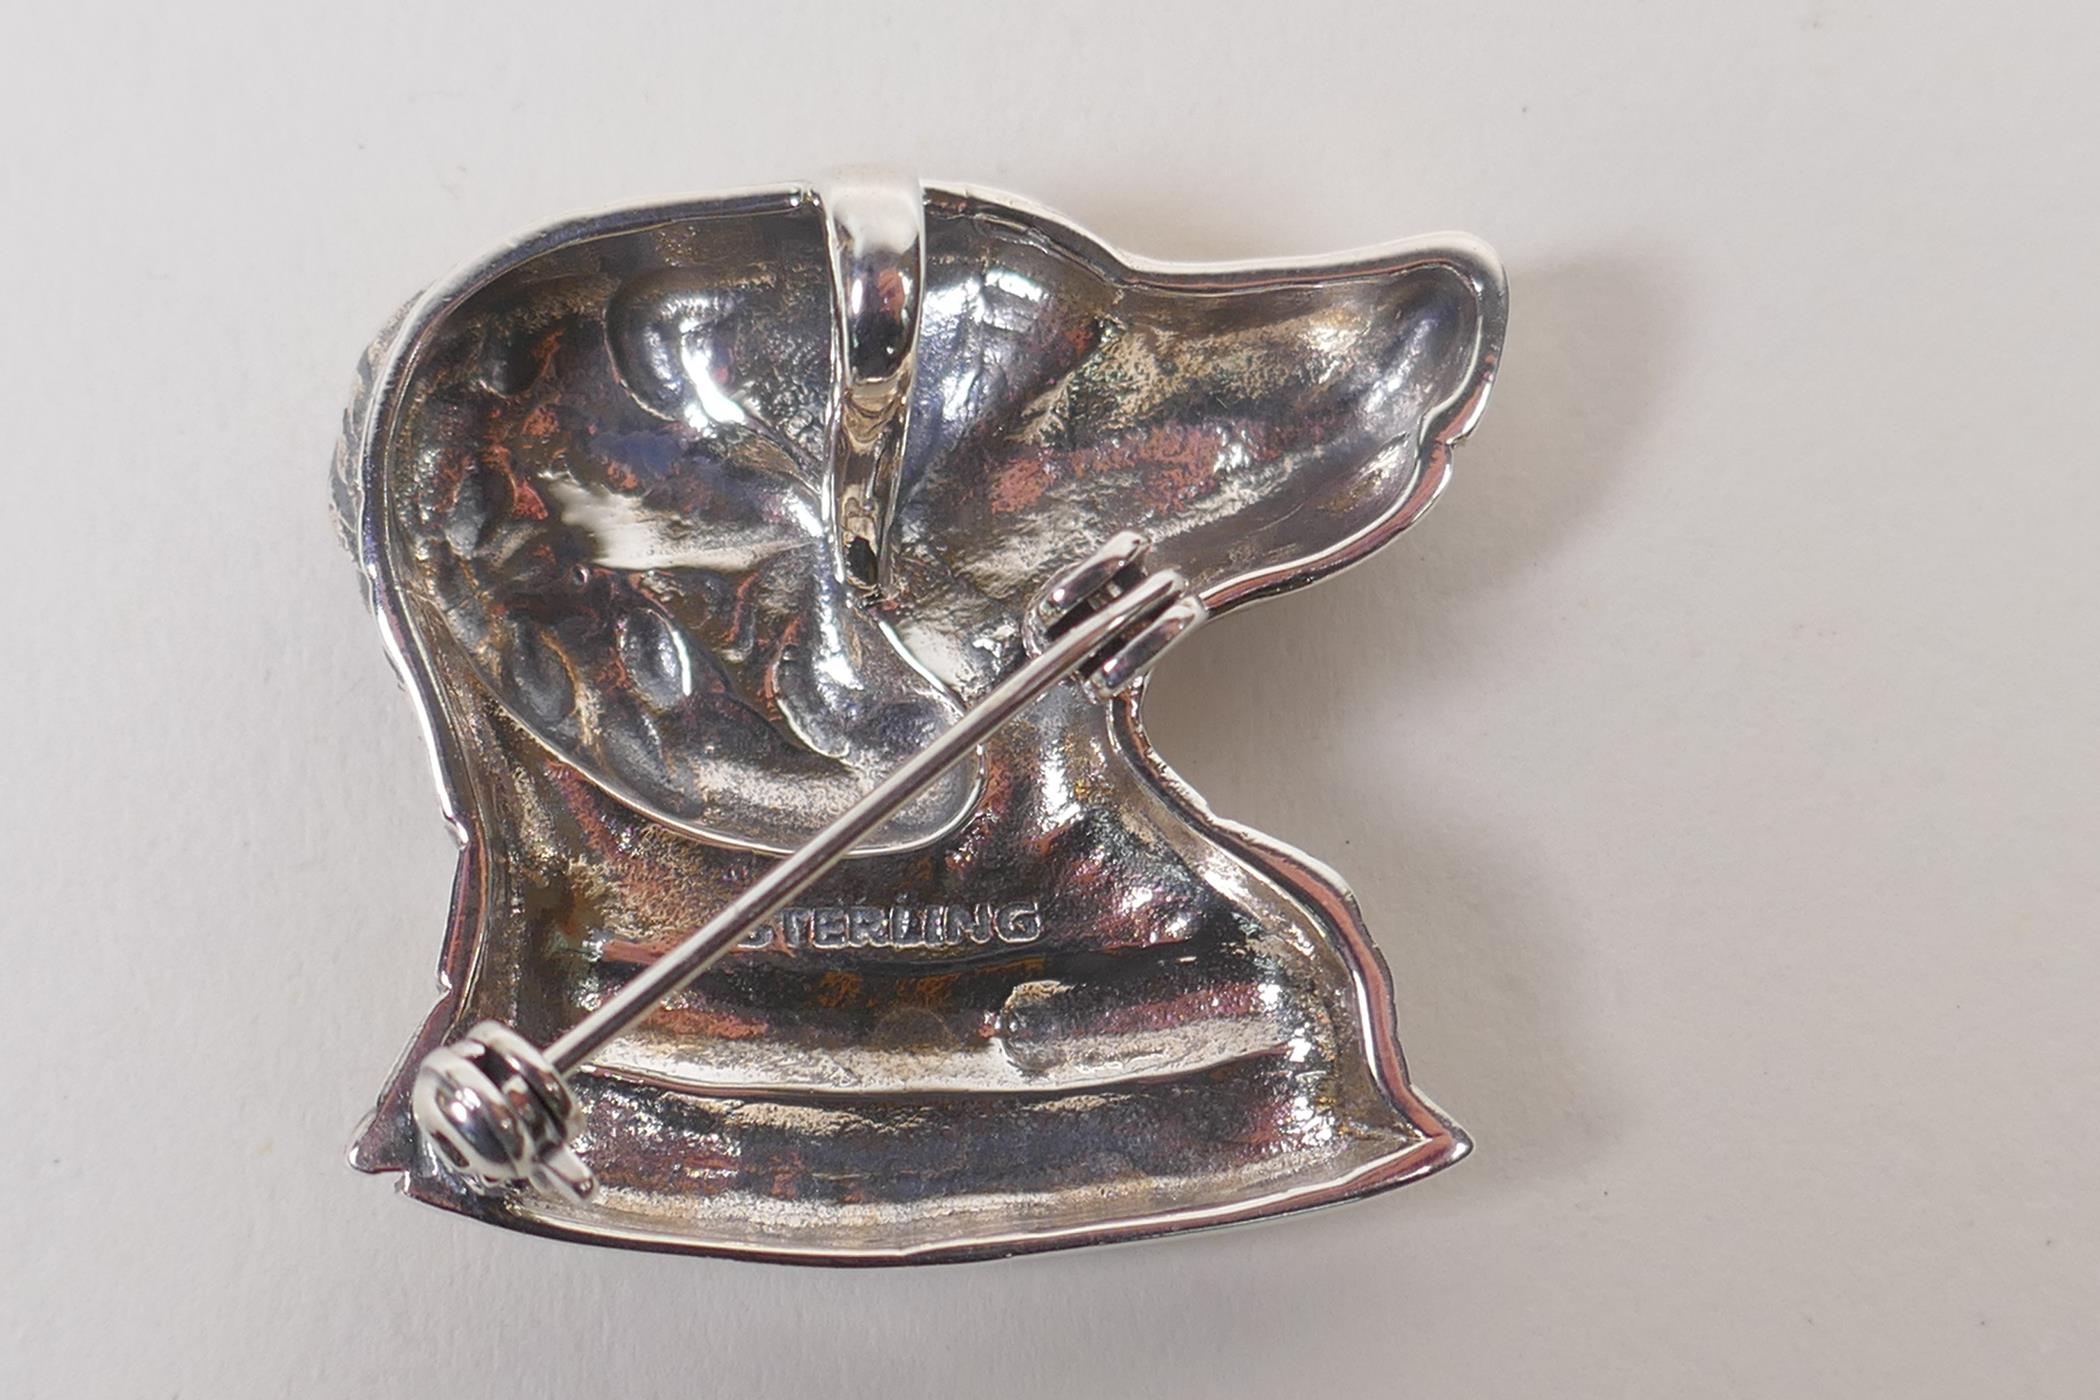 A sterling silver dog's head brooch, 3 x 3cm - Image 2 of 2